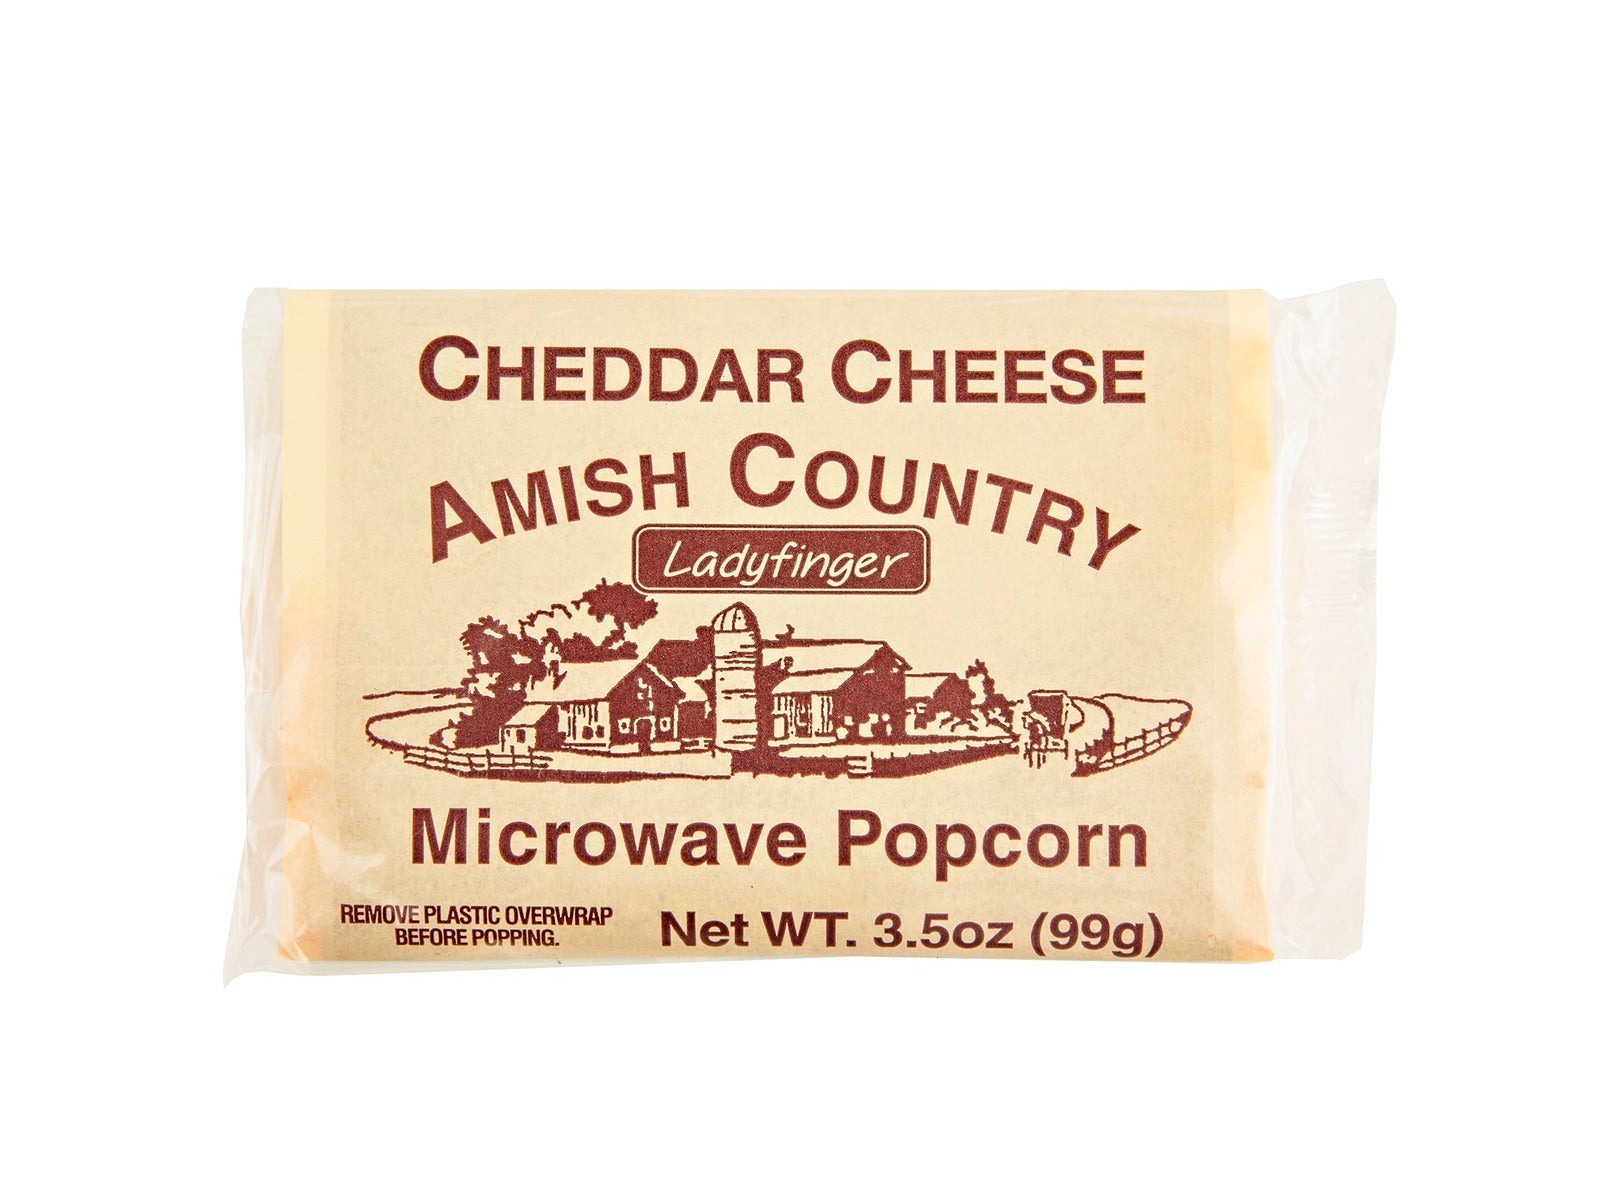 Amish Country Cheddar Cheese Microwave Popcorn 3.5 oz